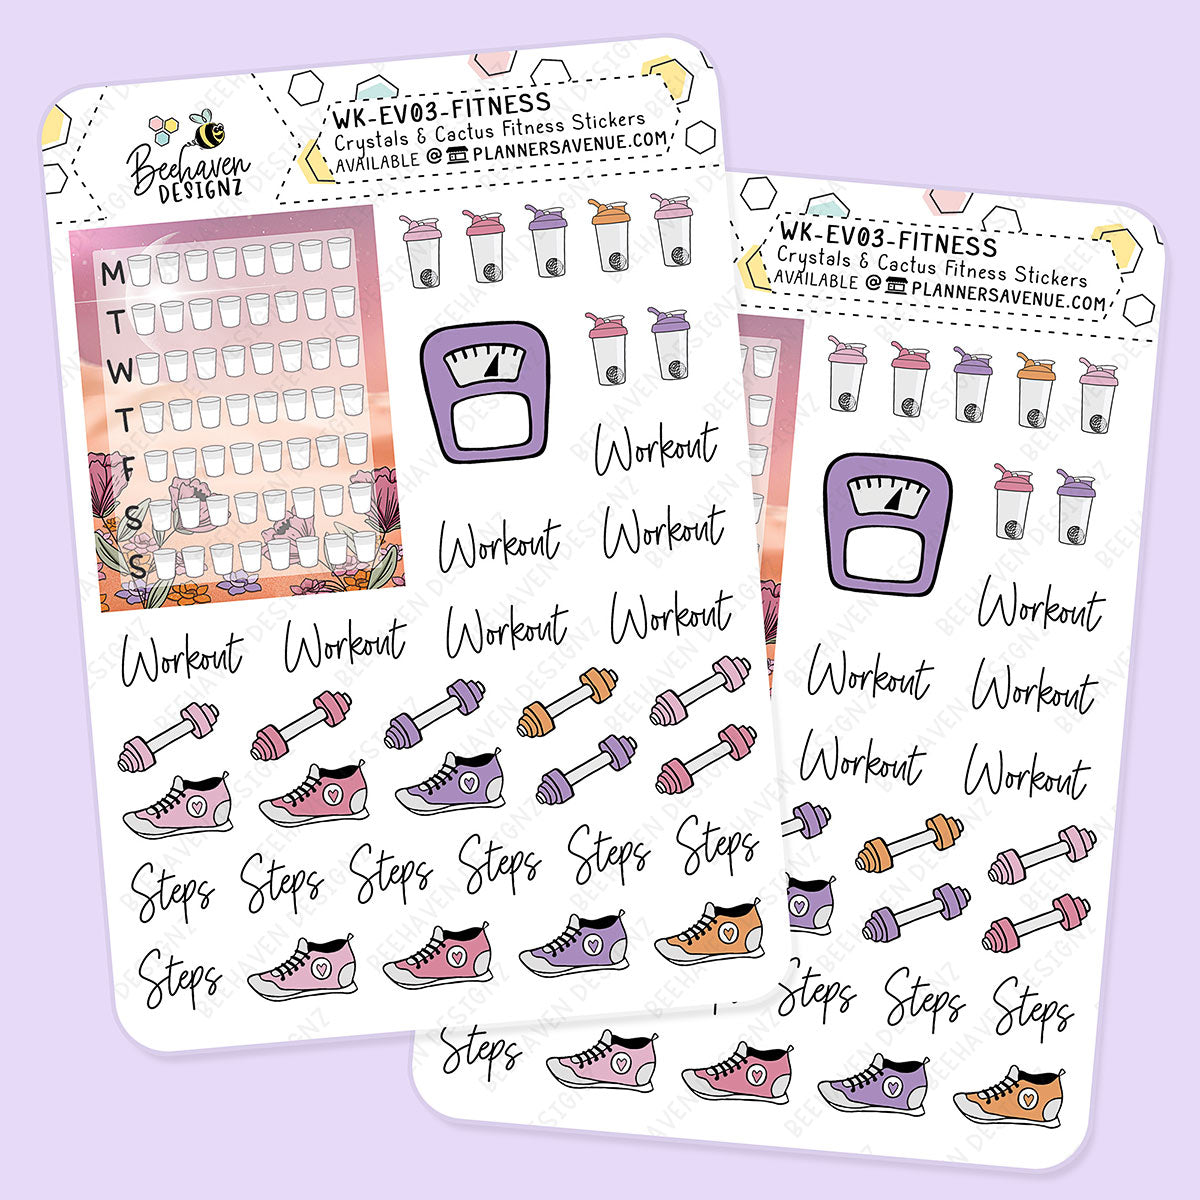 Crystal Cactus Fitness Planner Stickers